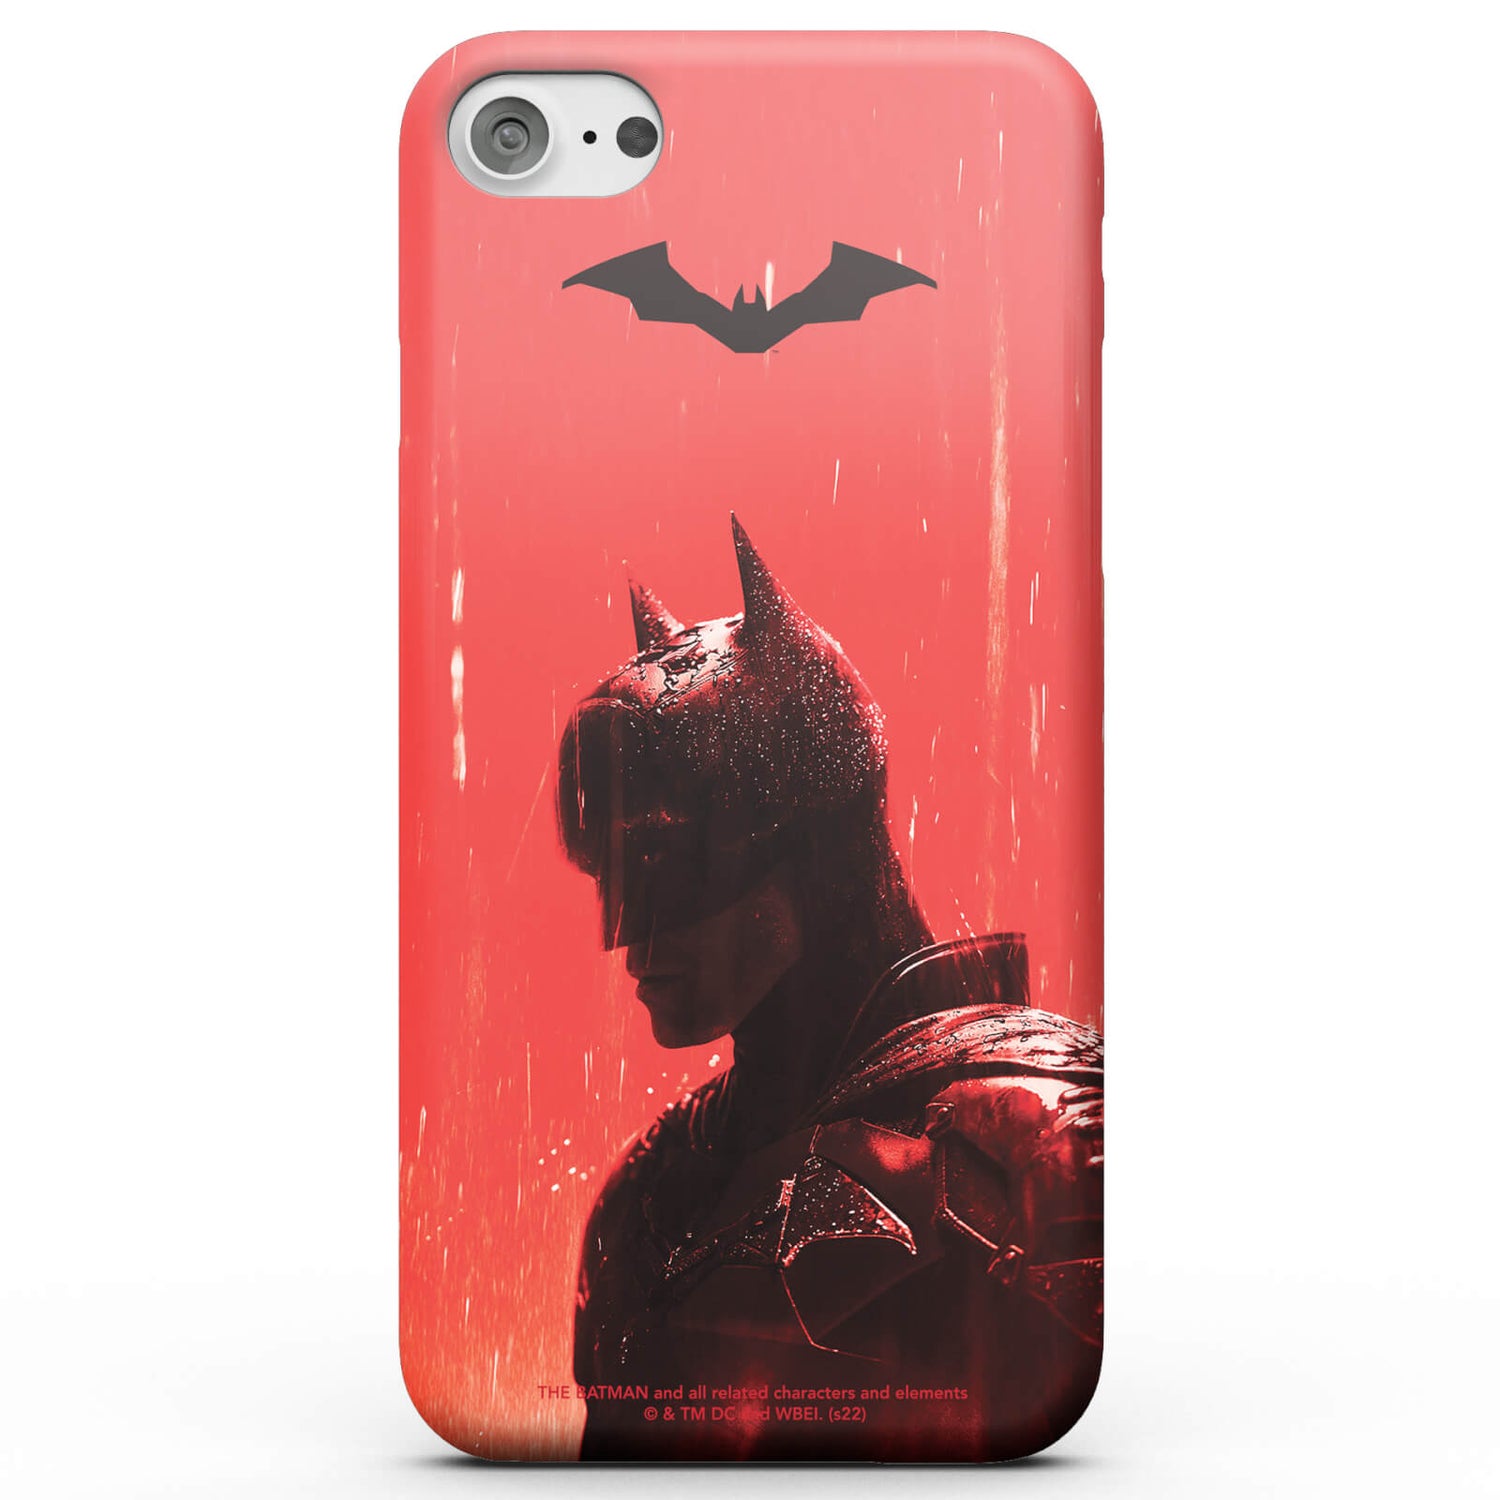 The Batman The Bat Phone Case for iPhone and Android